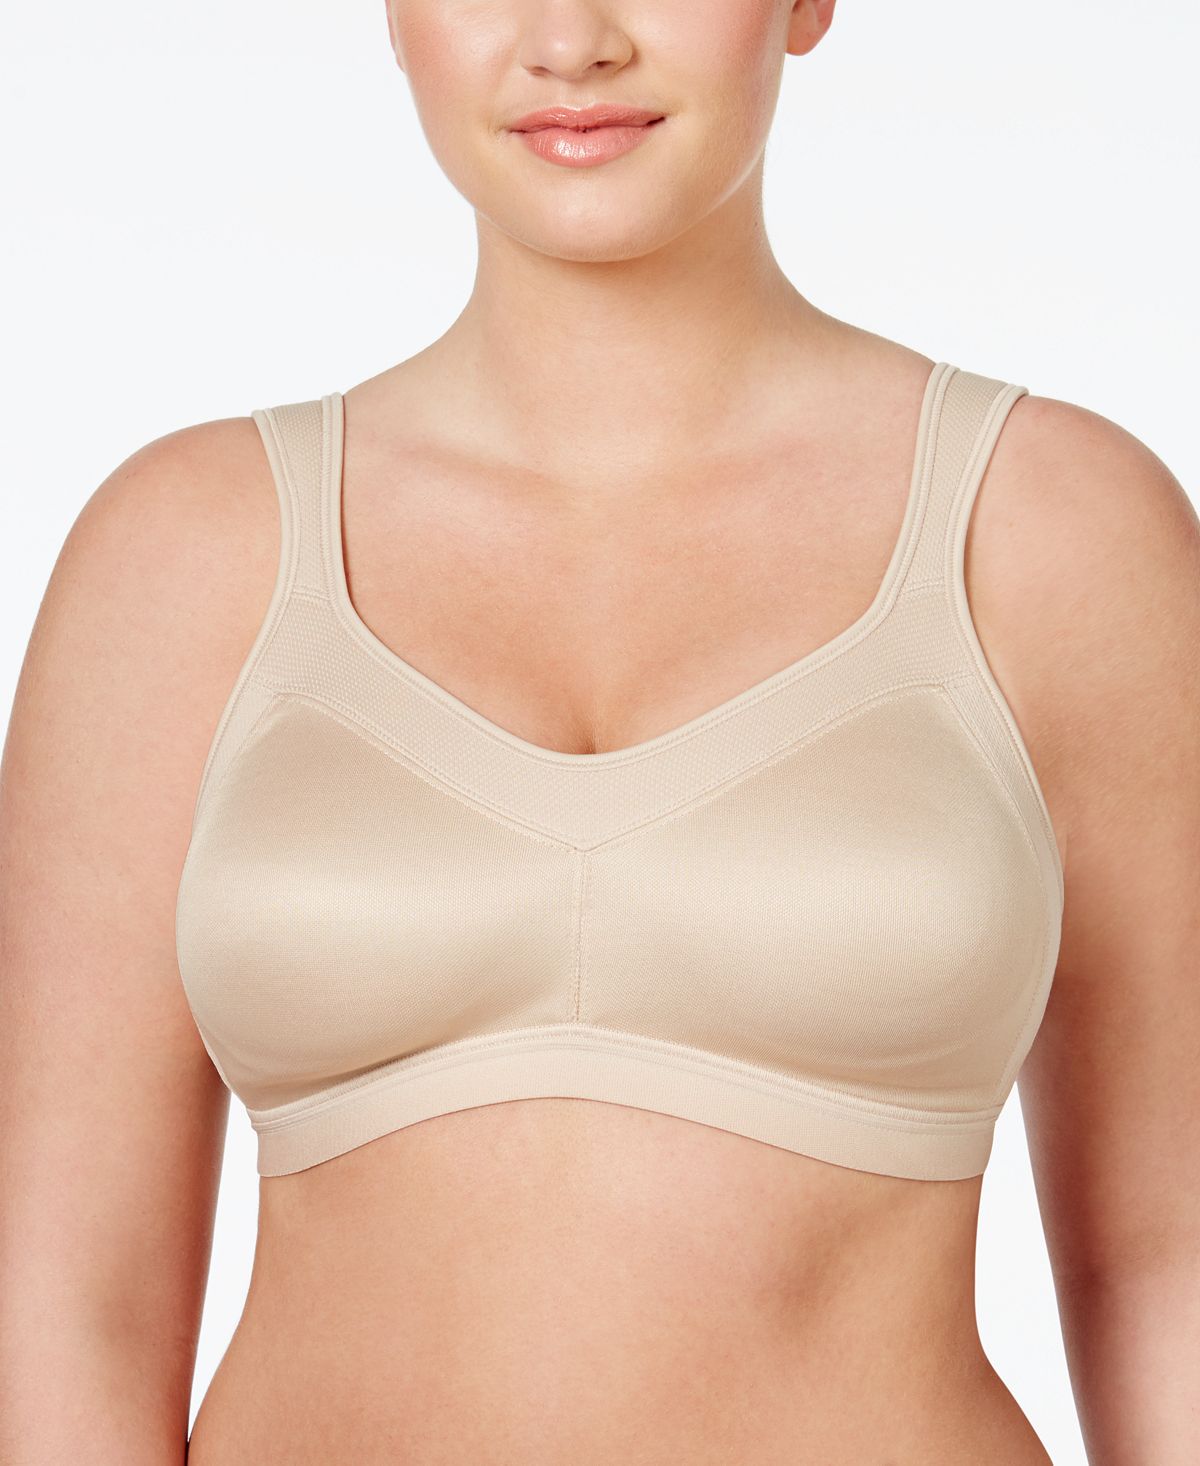 Playtex Wirefree Bra 18 Hour Smoothing Minimizer TruSUPPORT Fully adjustable